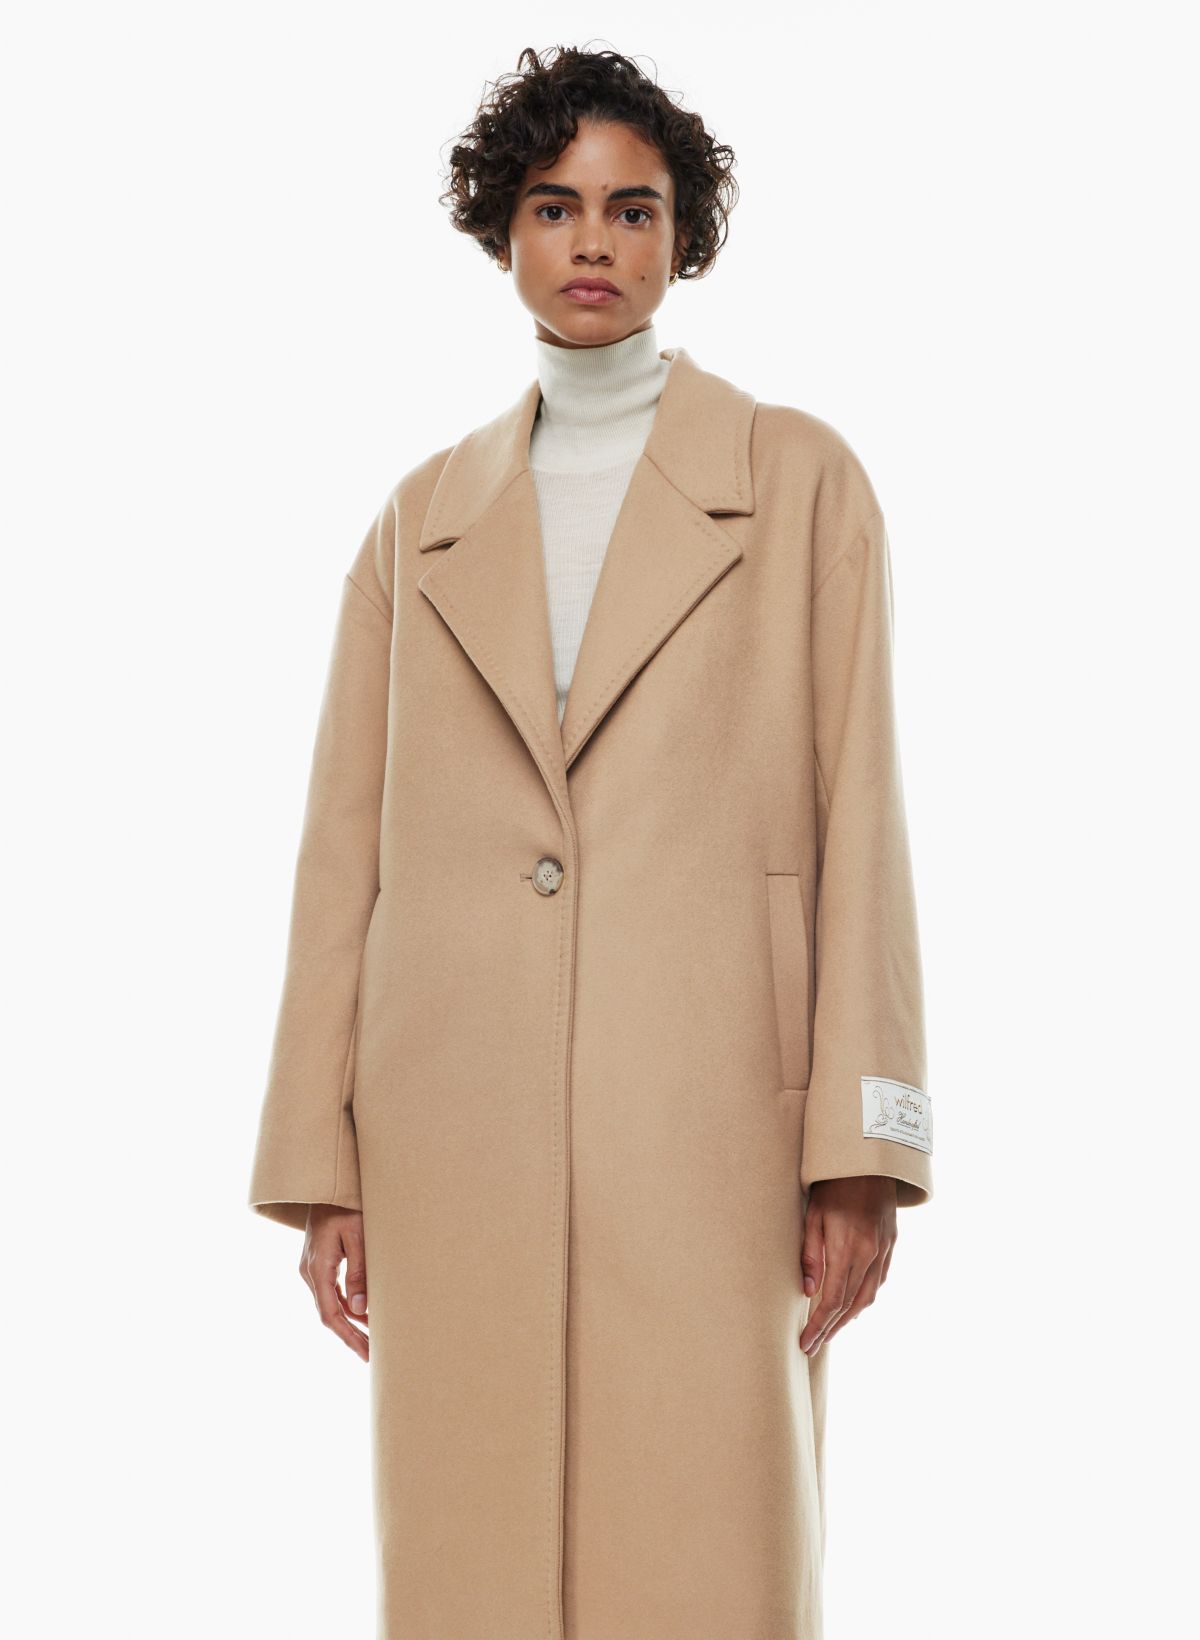 Wilfred THE | COAT Aritzia ONLY US